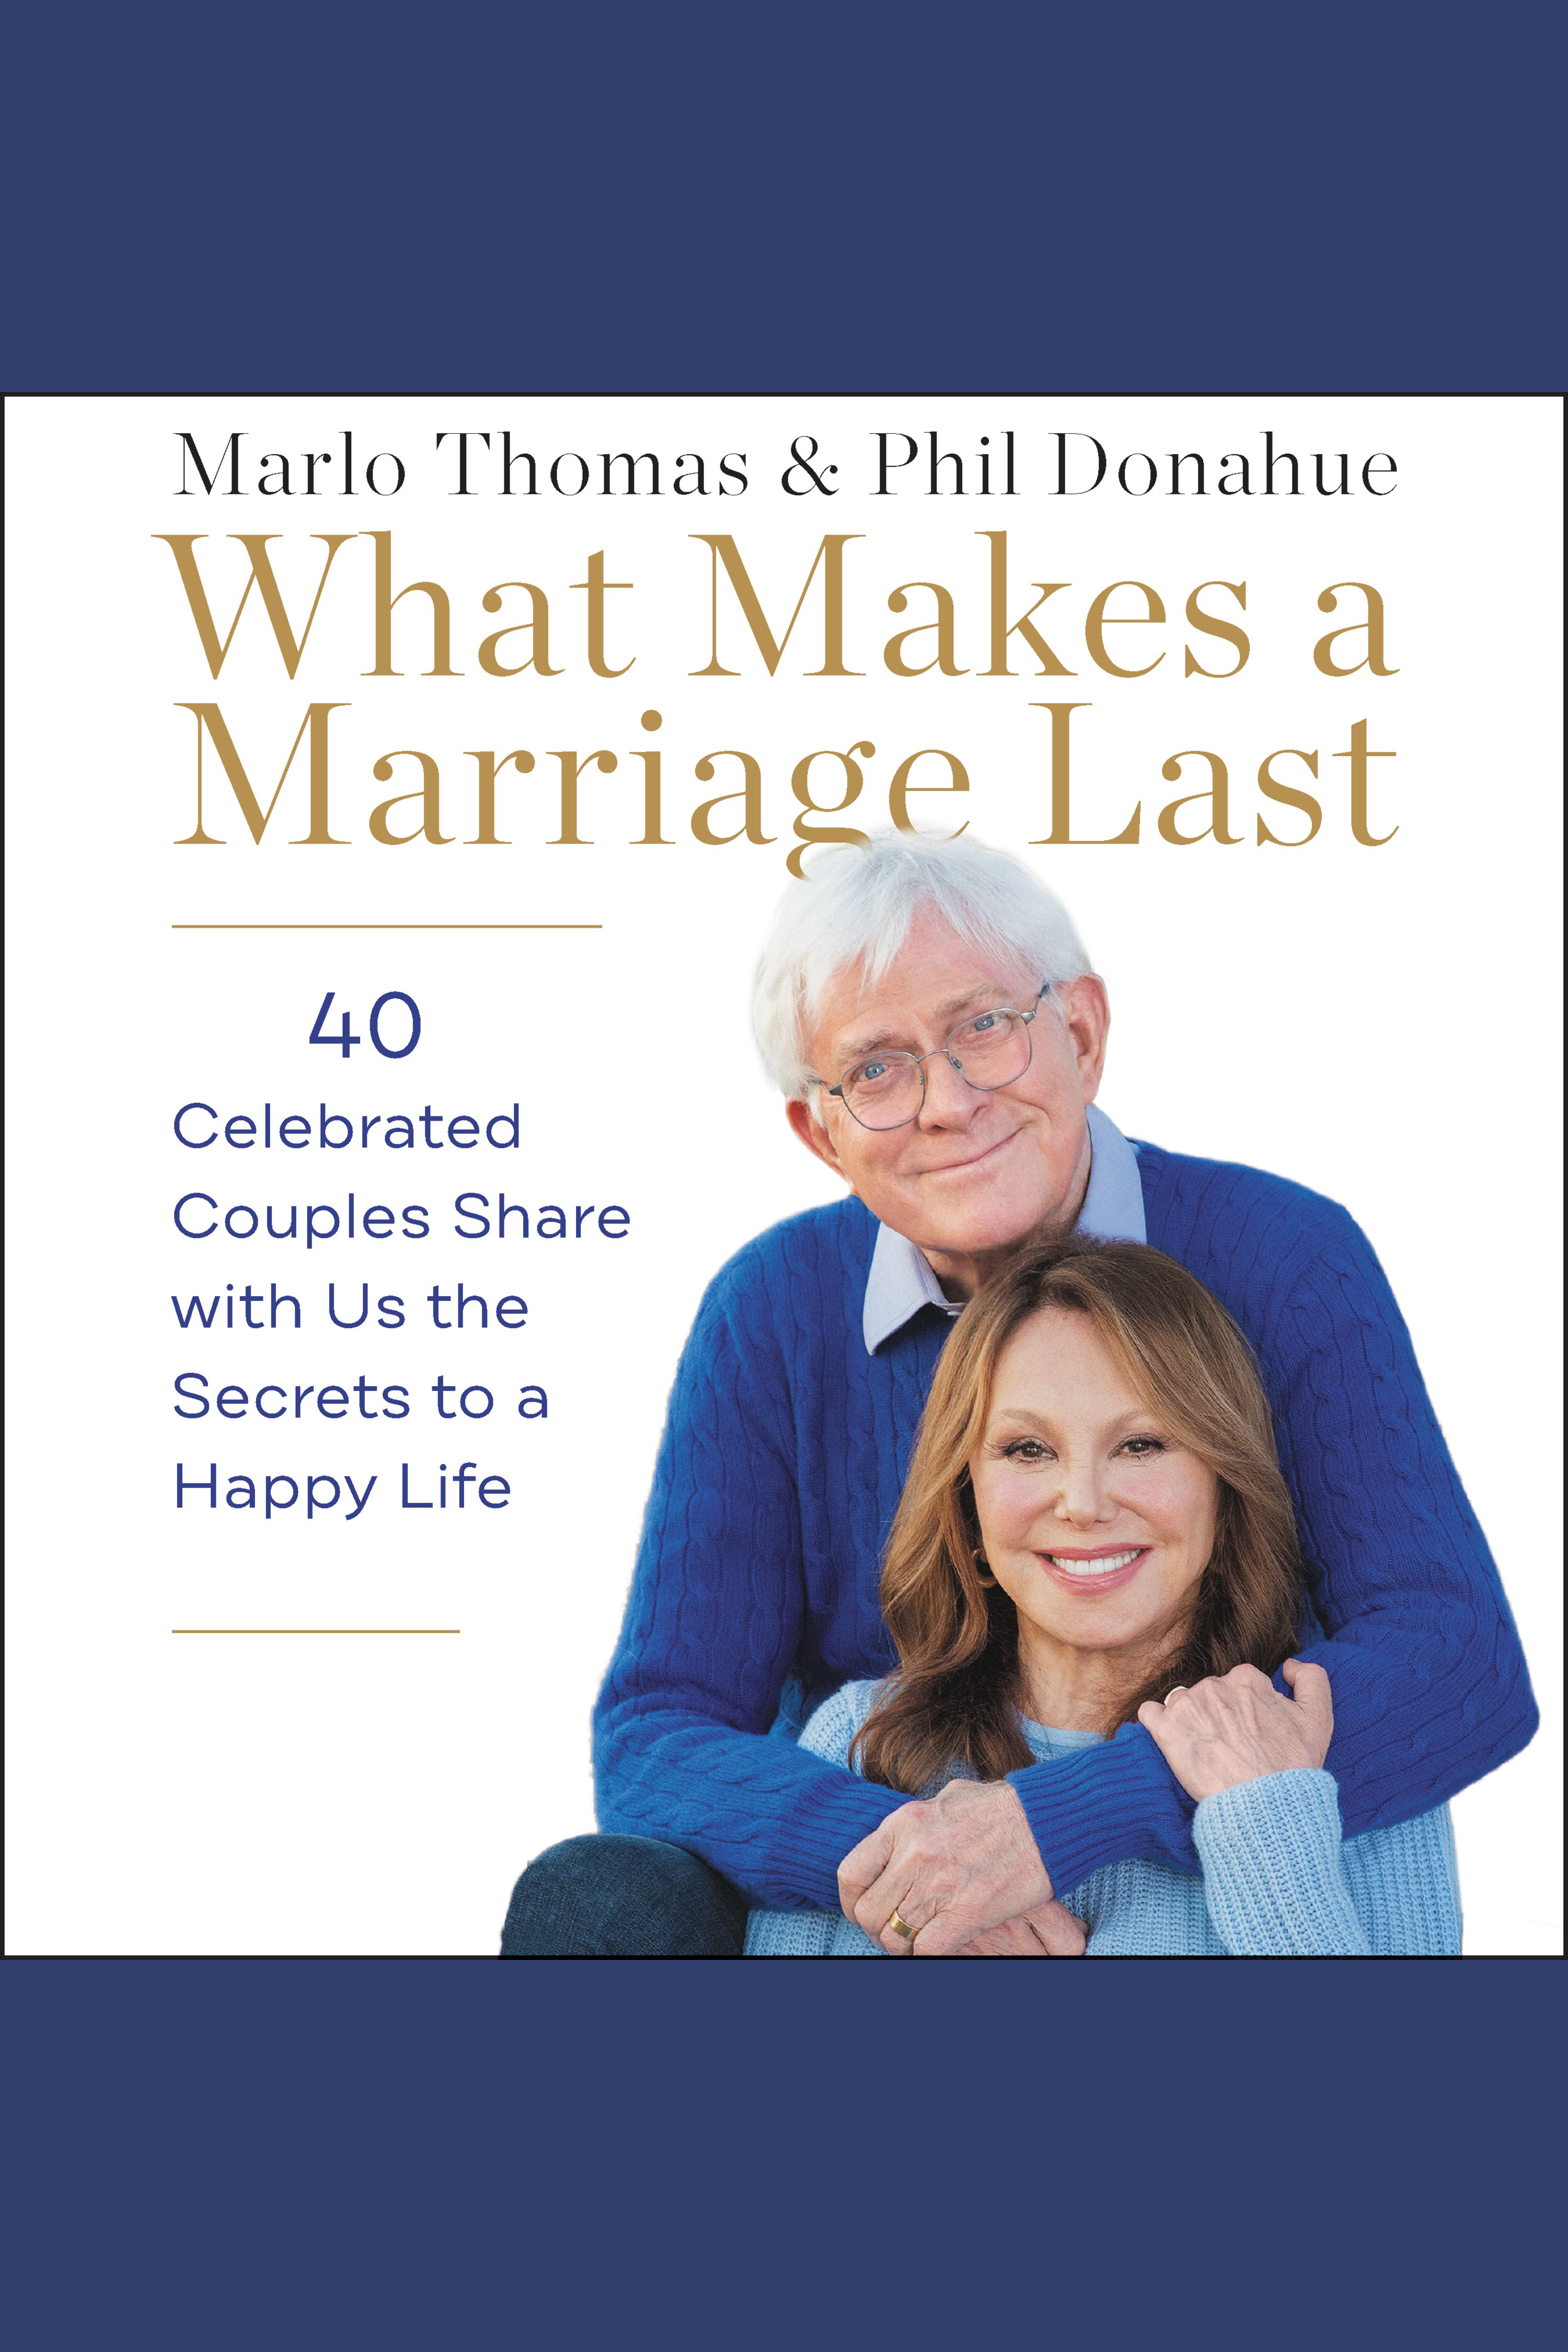 What Makes a Marriage Last 40 Celebrated Couples Share with Us the Secrets to a Happy Life cover image